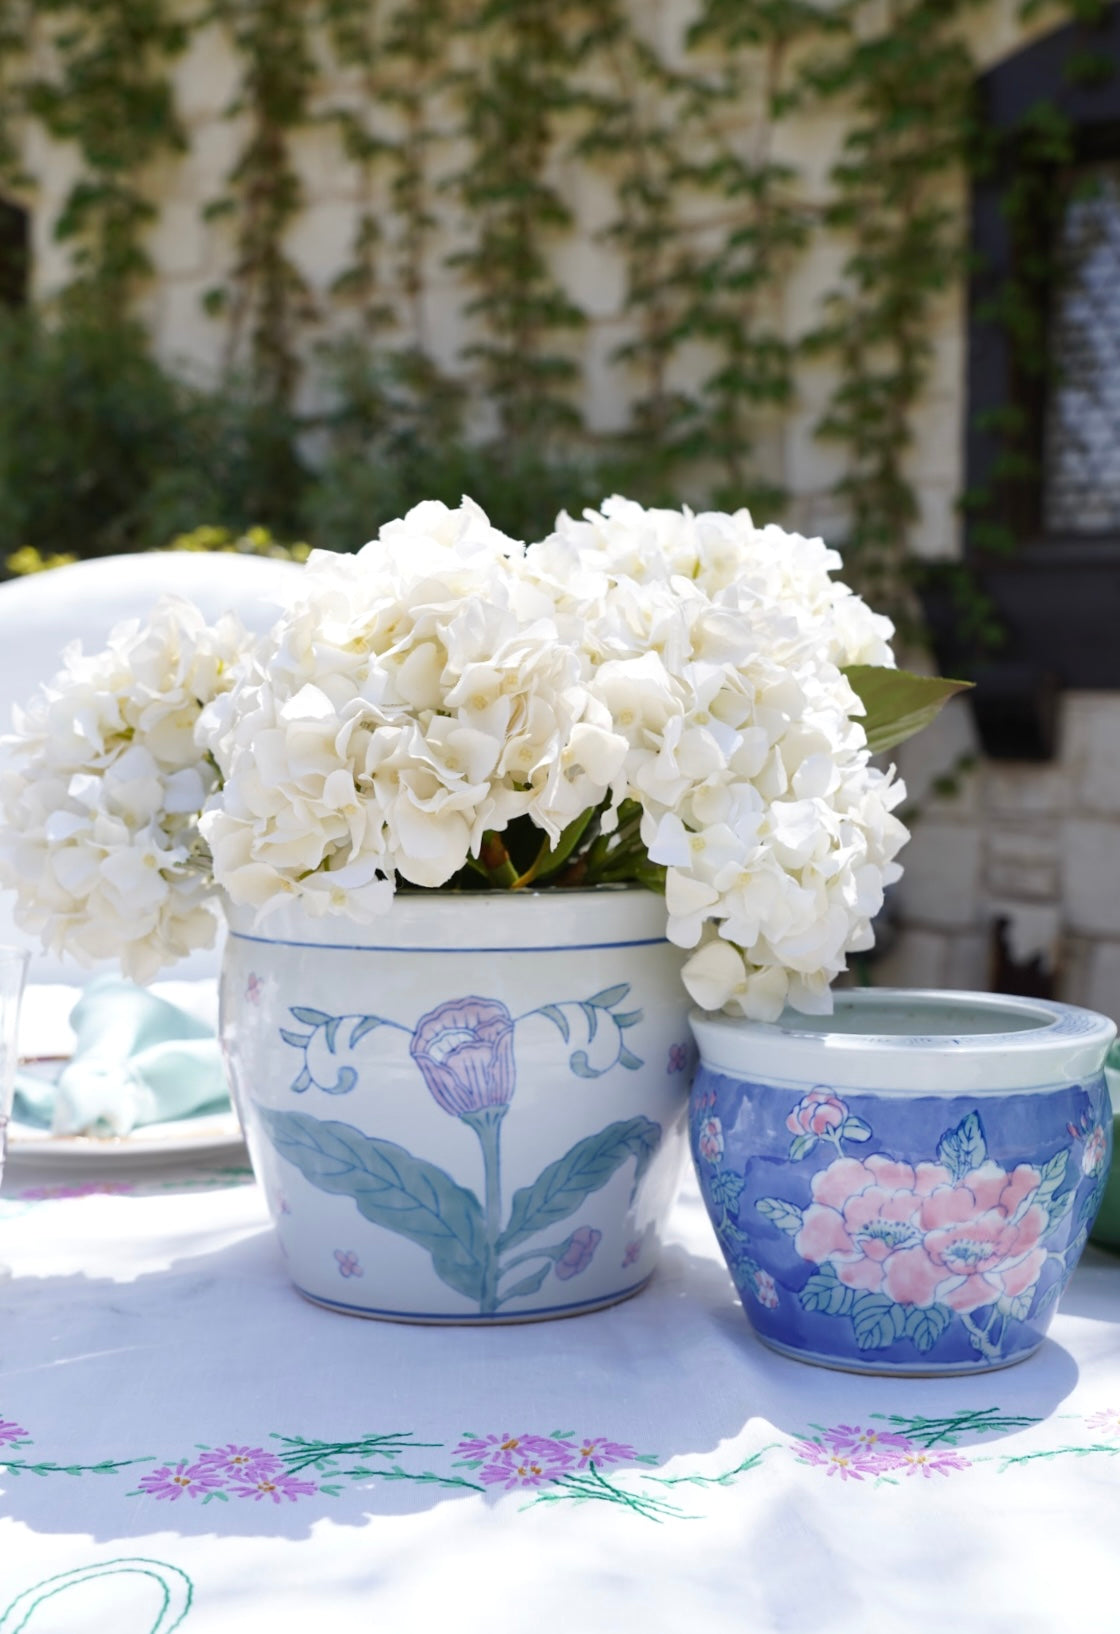 CHINOISERIE FISH BOWL PLANTERS